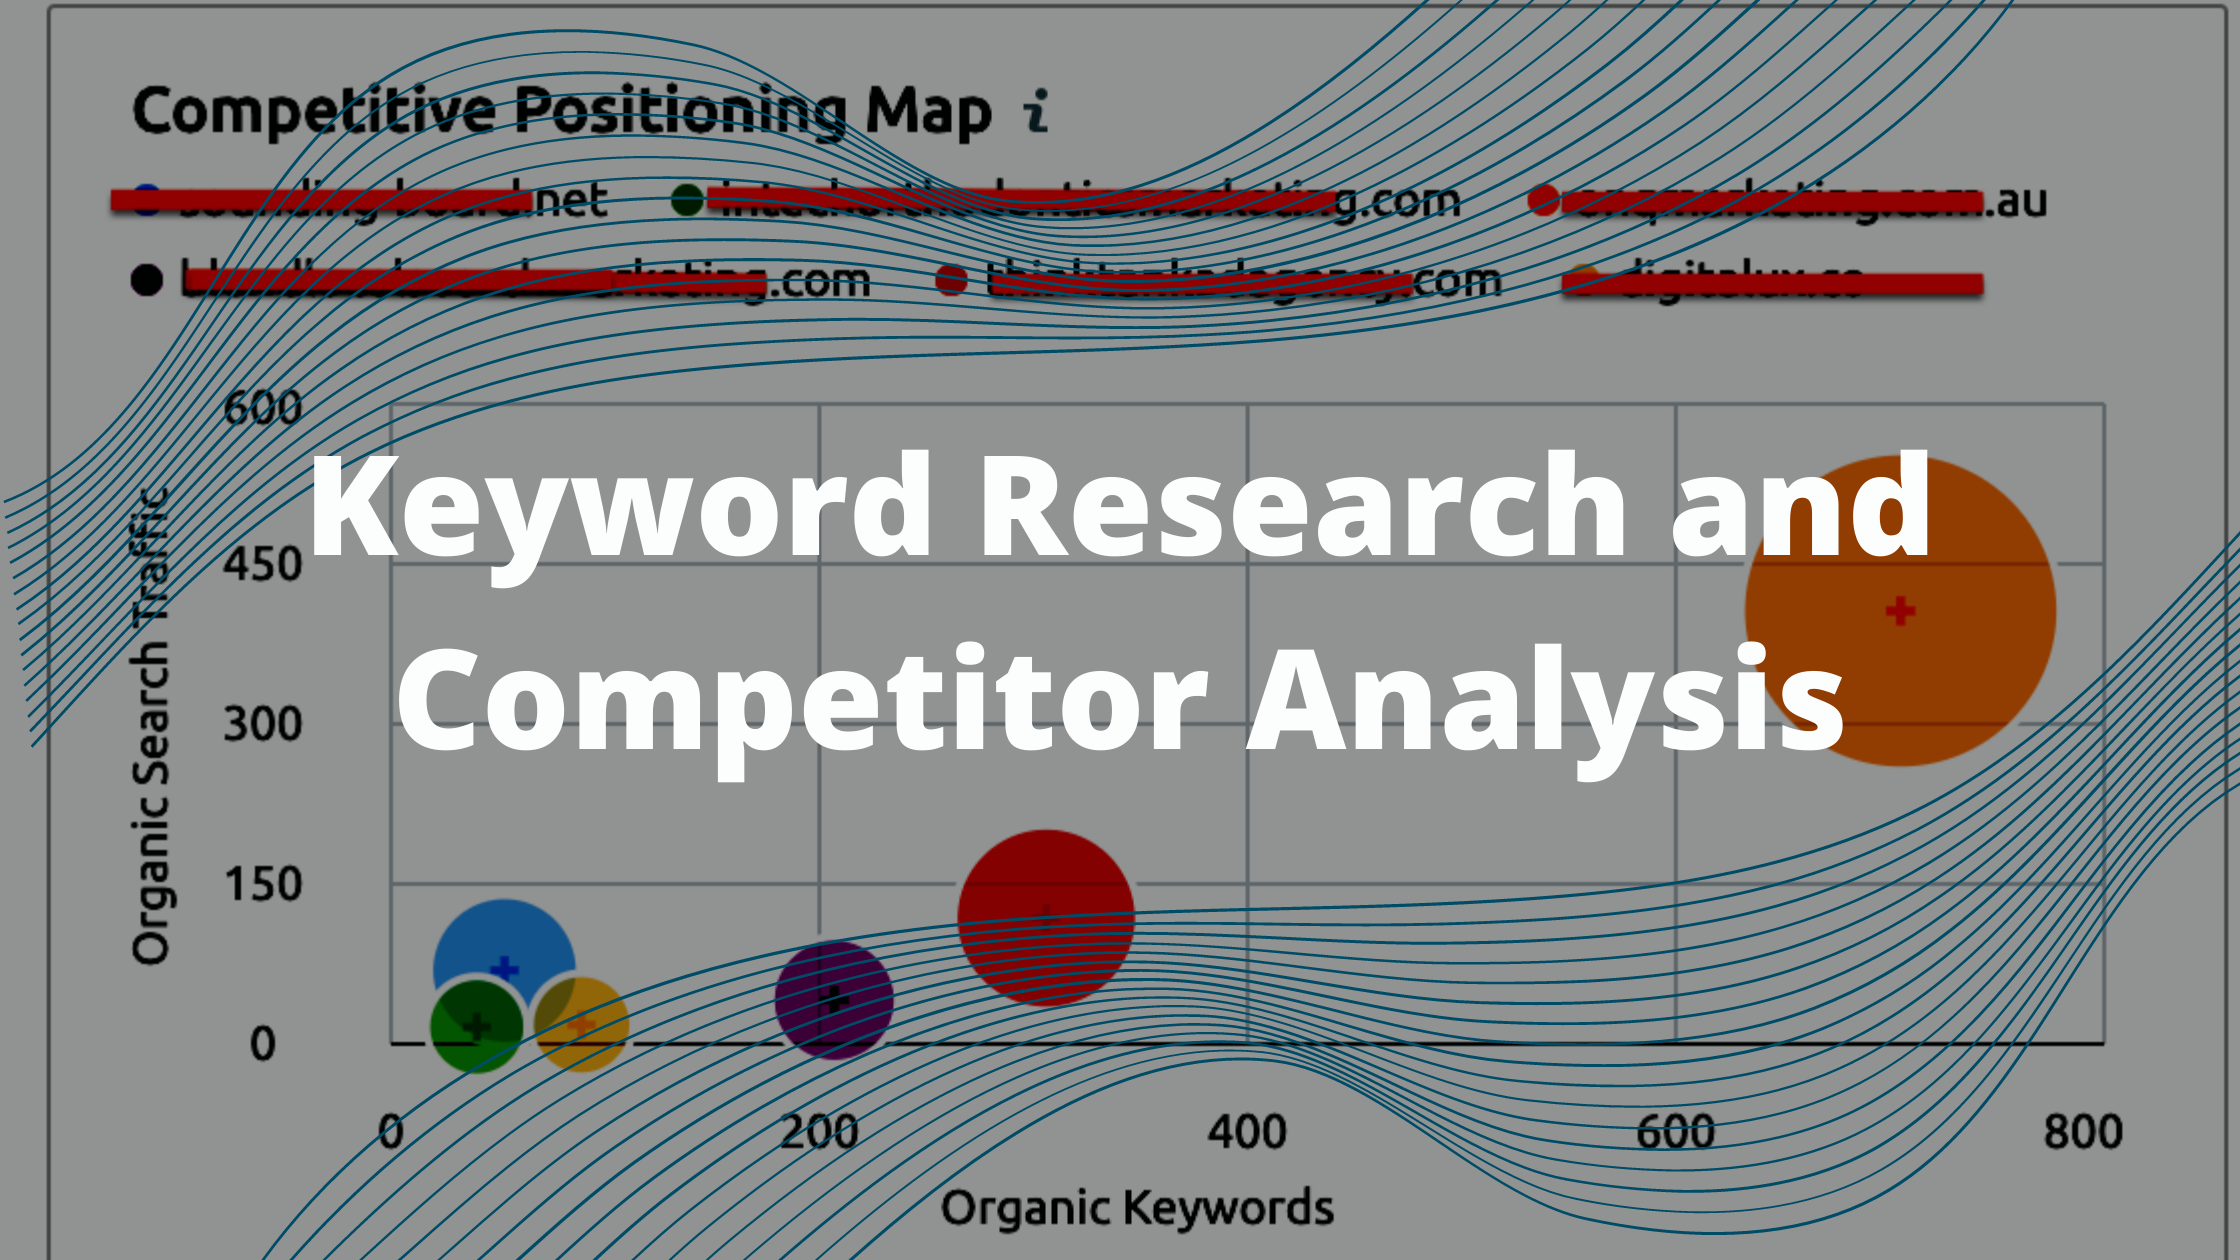 Keyword Research and Competitor Analysis